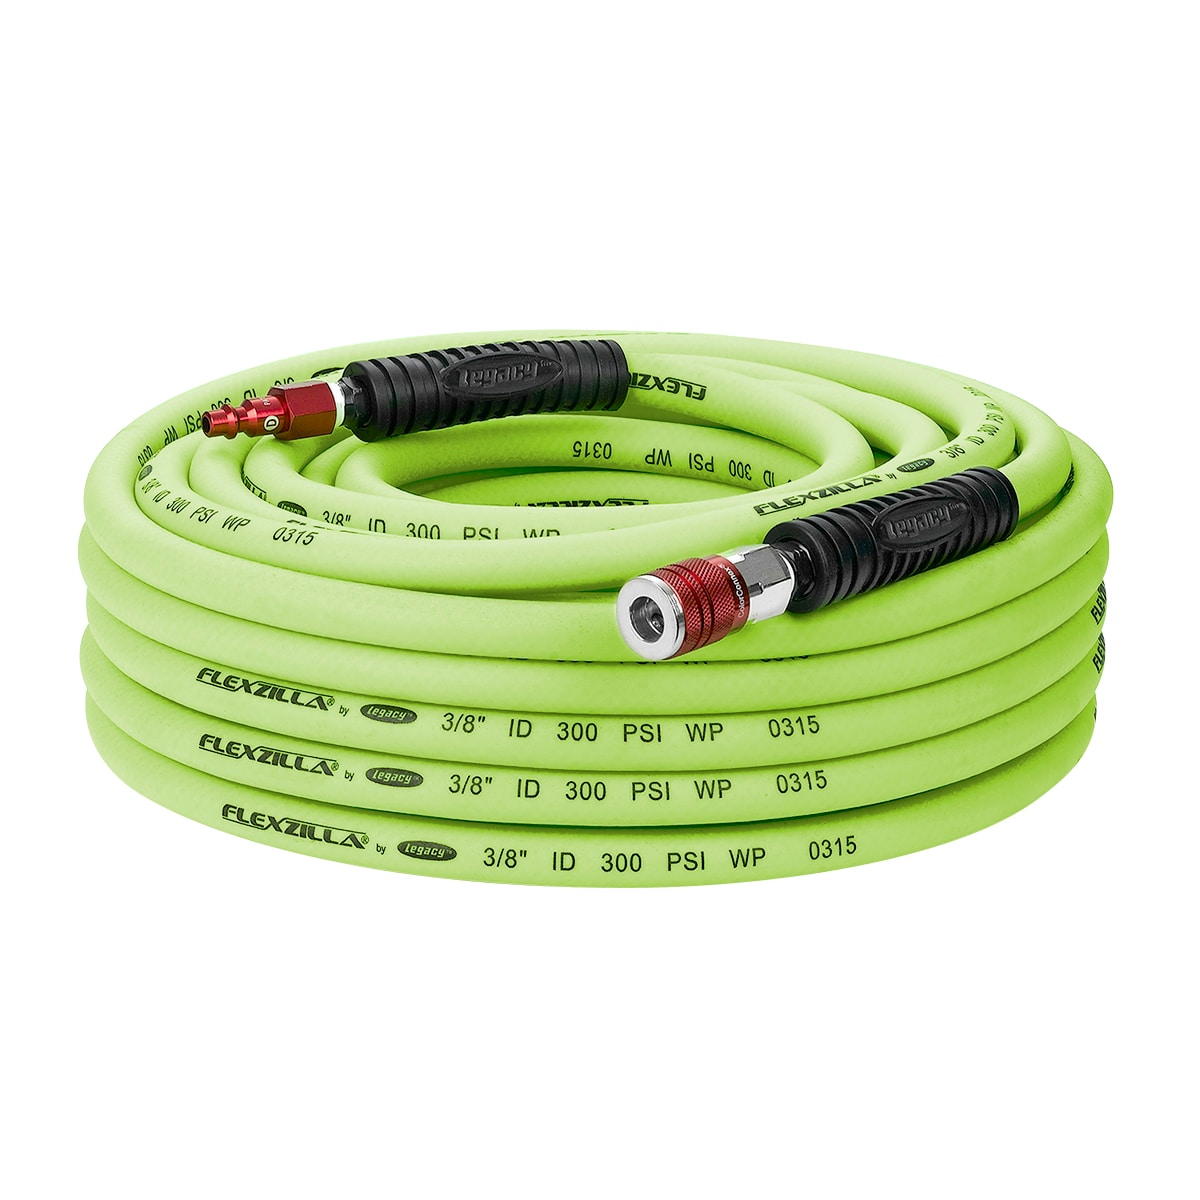 Flexzilla Air Hose, 3/8-in X 50-ft, with Colorconnex Coupler and